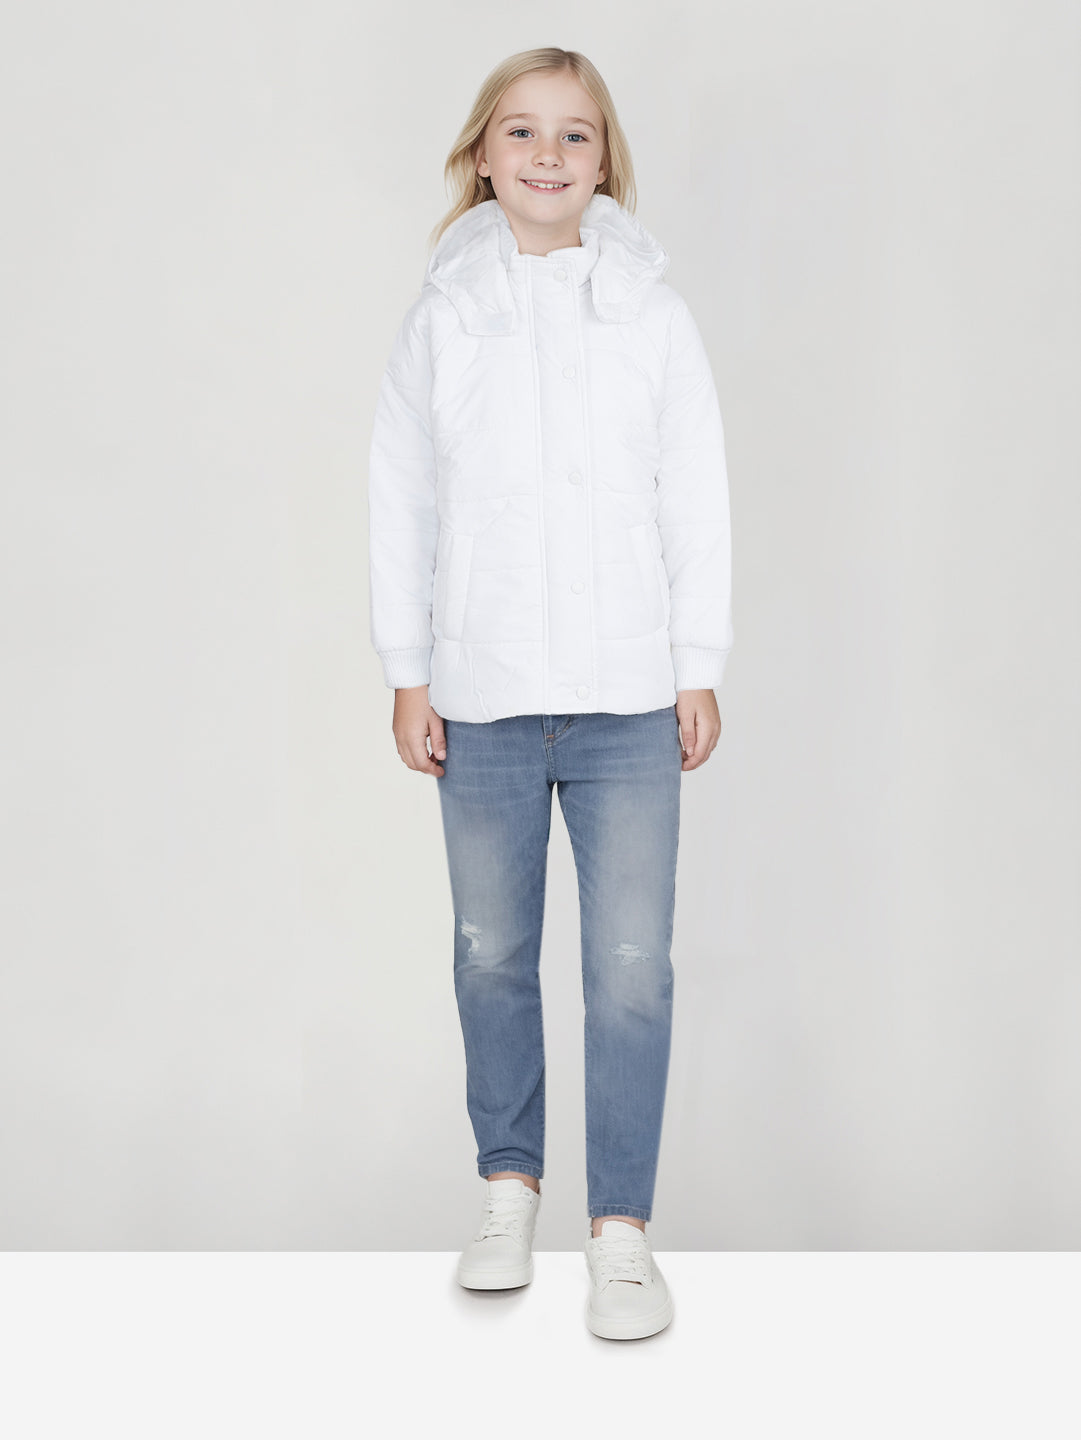 Girls White Solid Polyster Heavy Winter Jacket